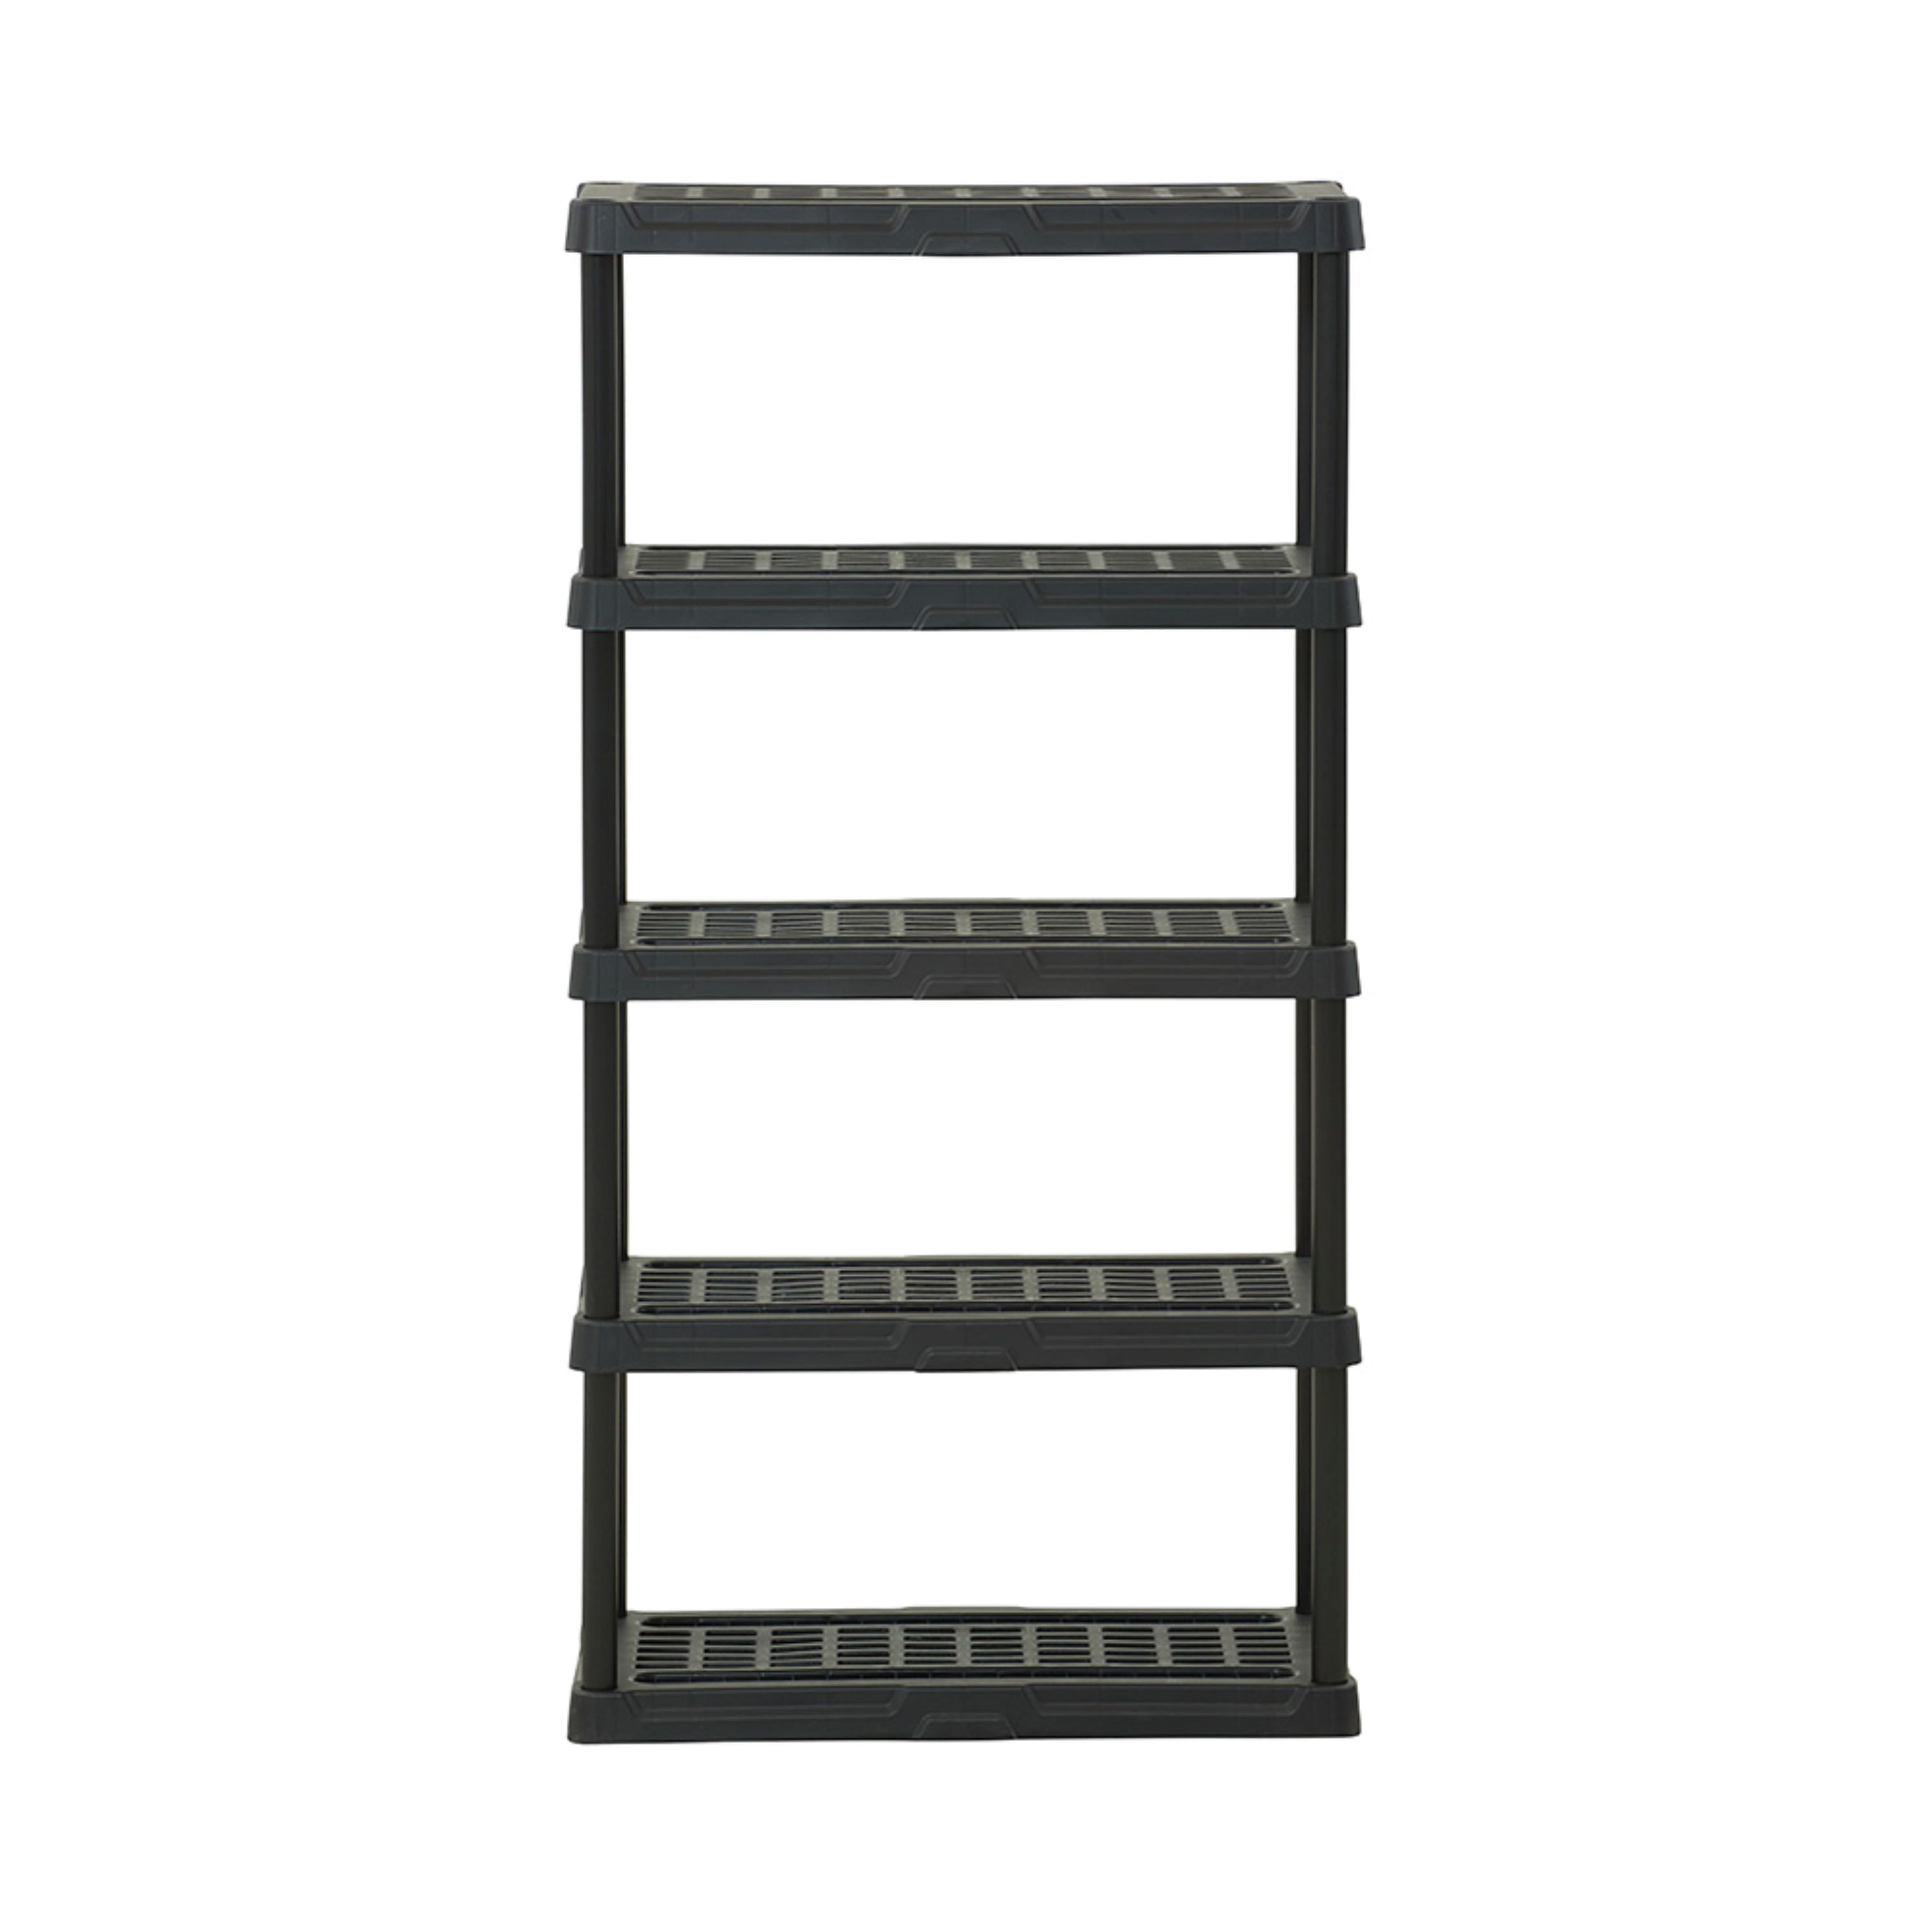 Simply Put 11-in W x 2-in H 1-Tier Cabinet-mount Plastic Tip-out